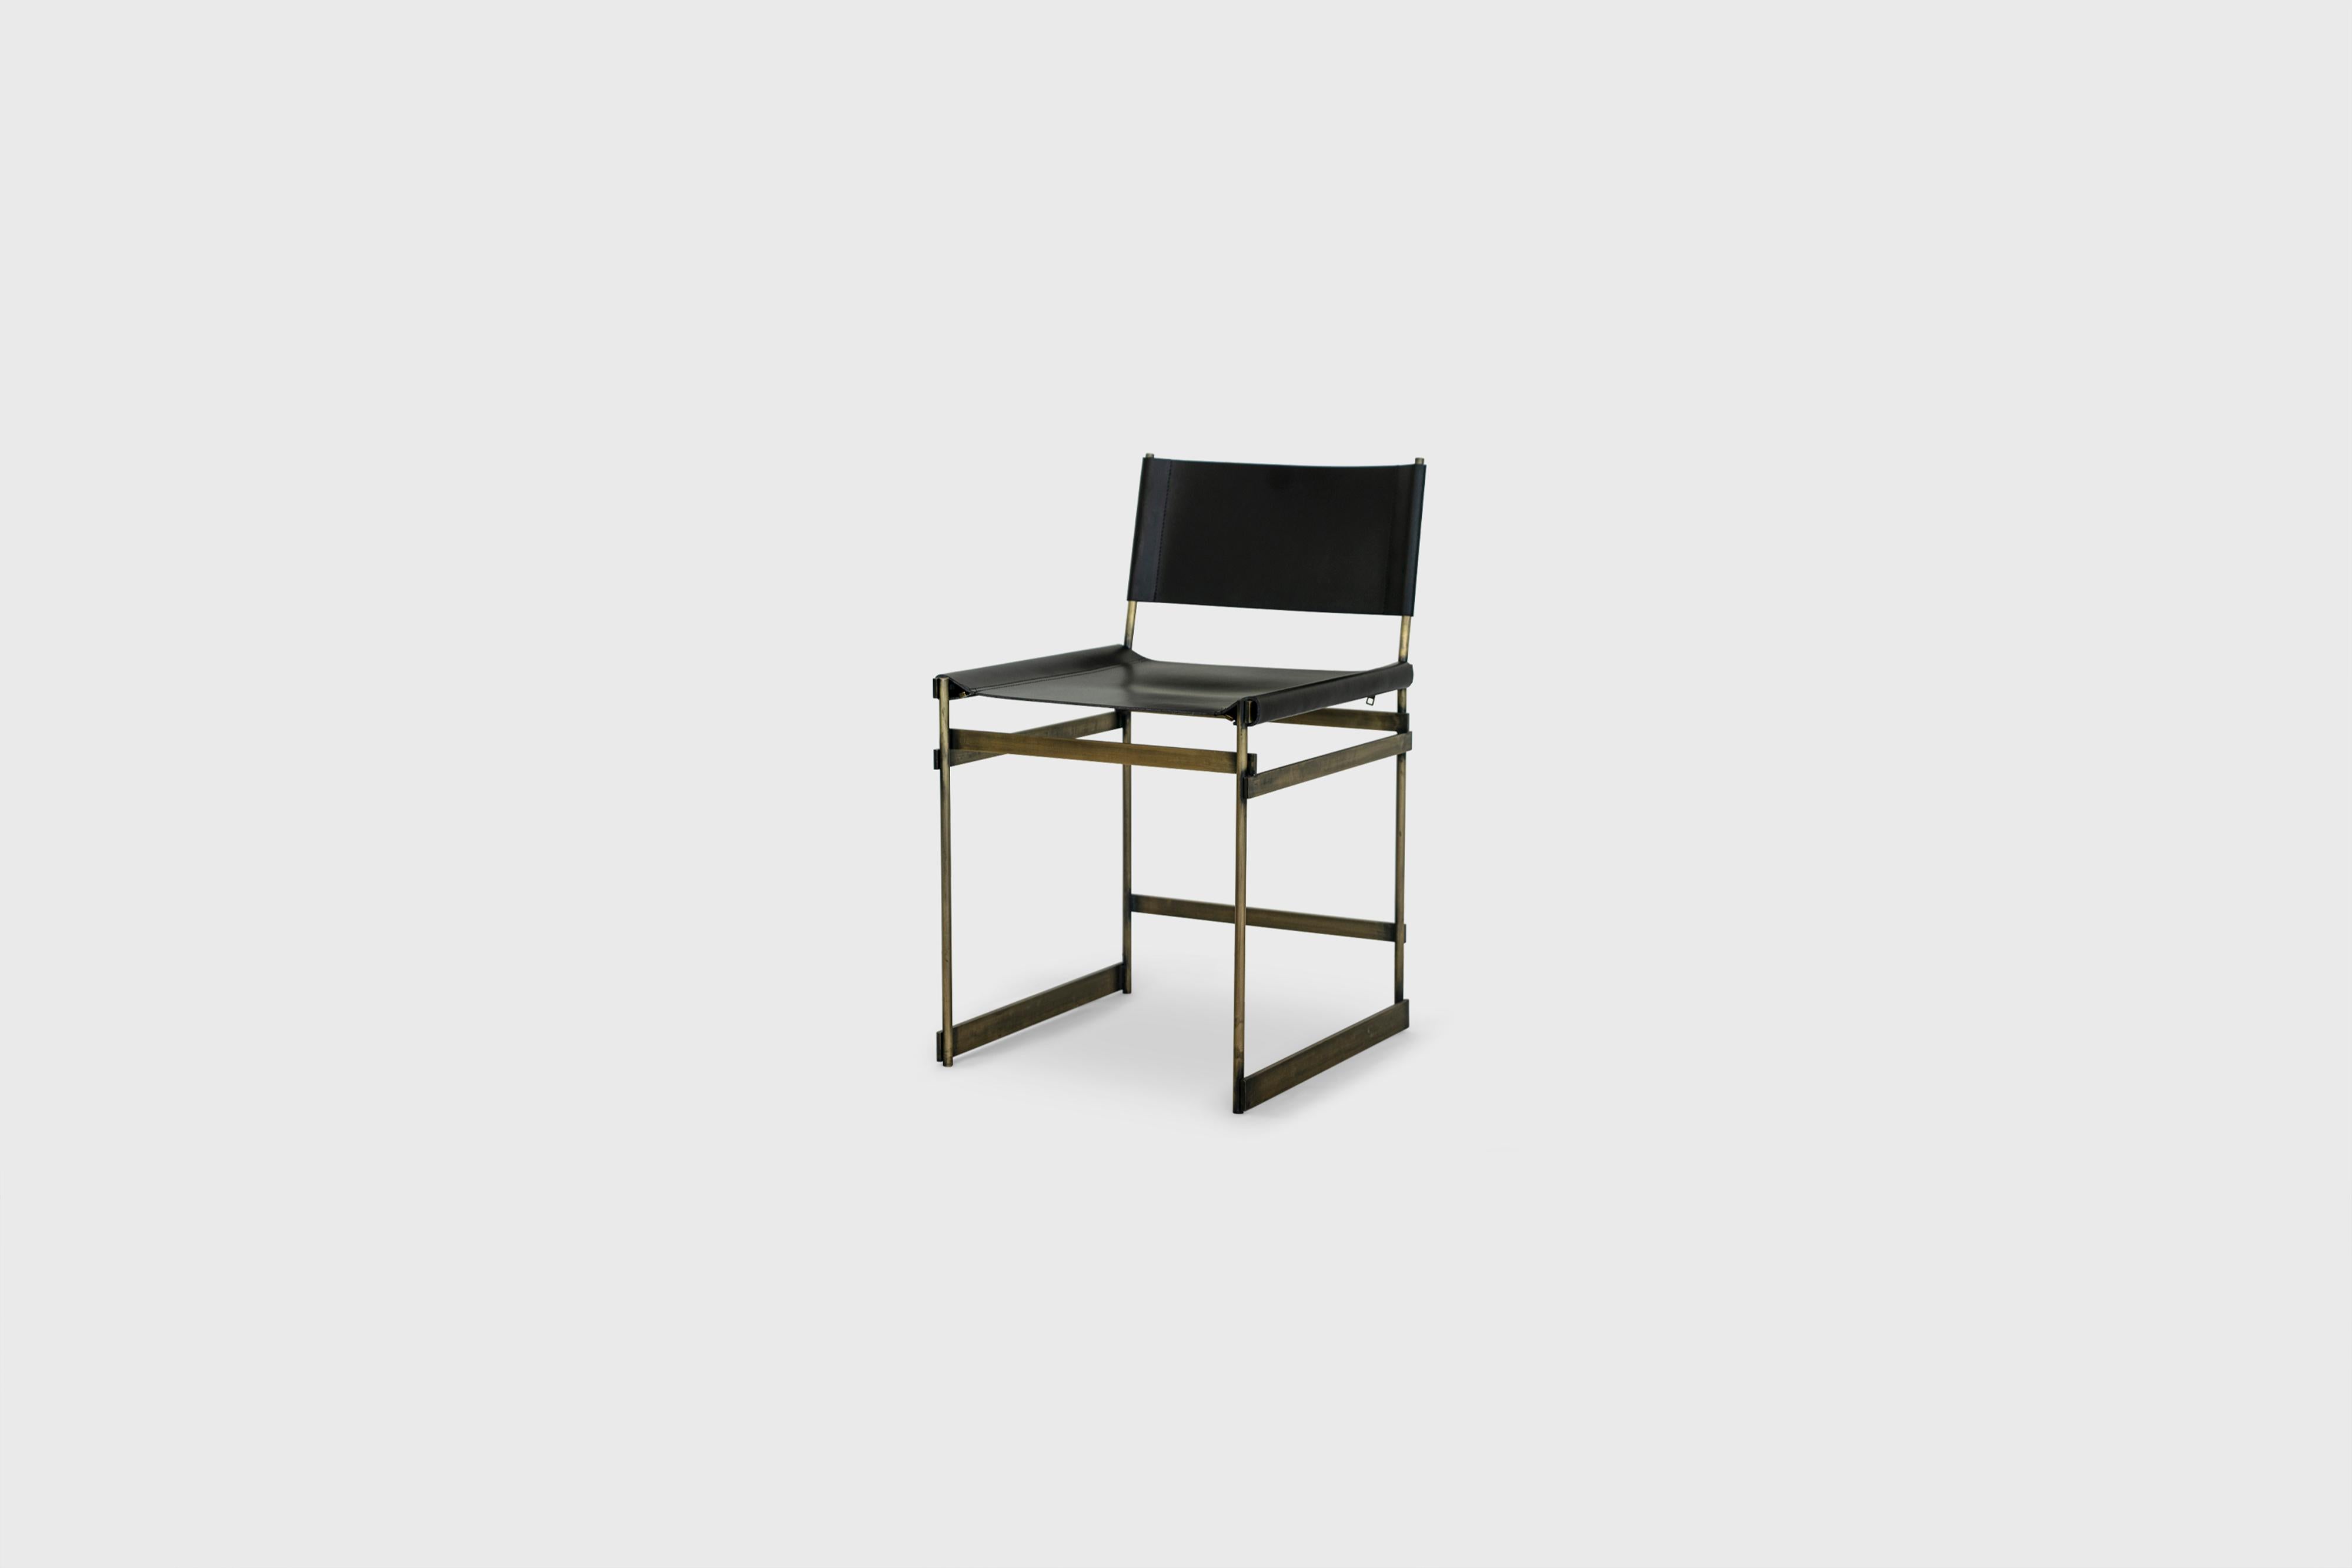 The Redo Chair in National Leather Seat, Aged Brass Finished Steel Frame
and Brass Zips

Designer: Alexander Diaz Anderson 

Dimensions 
L 44.3cm/17.4”
W 51.0cm/20.0”
H 73.0cm/28.7”

All our items are customizable to your size, requirements and